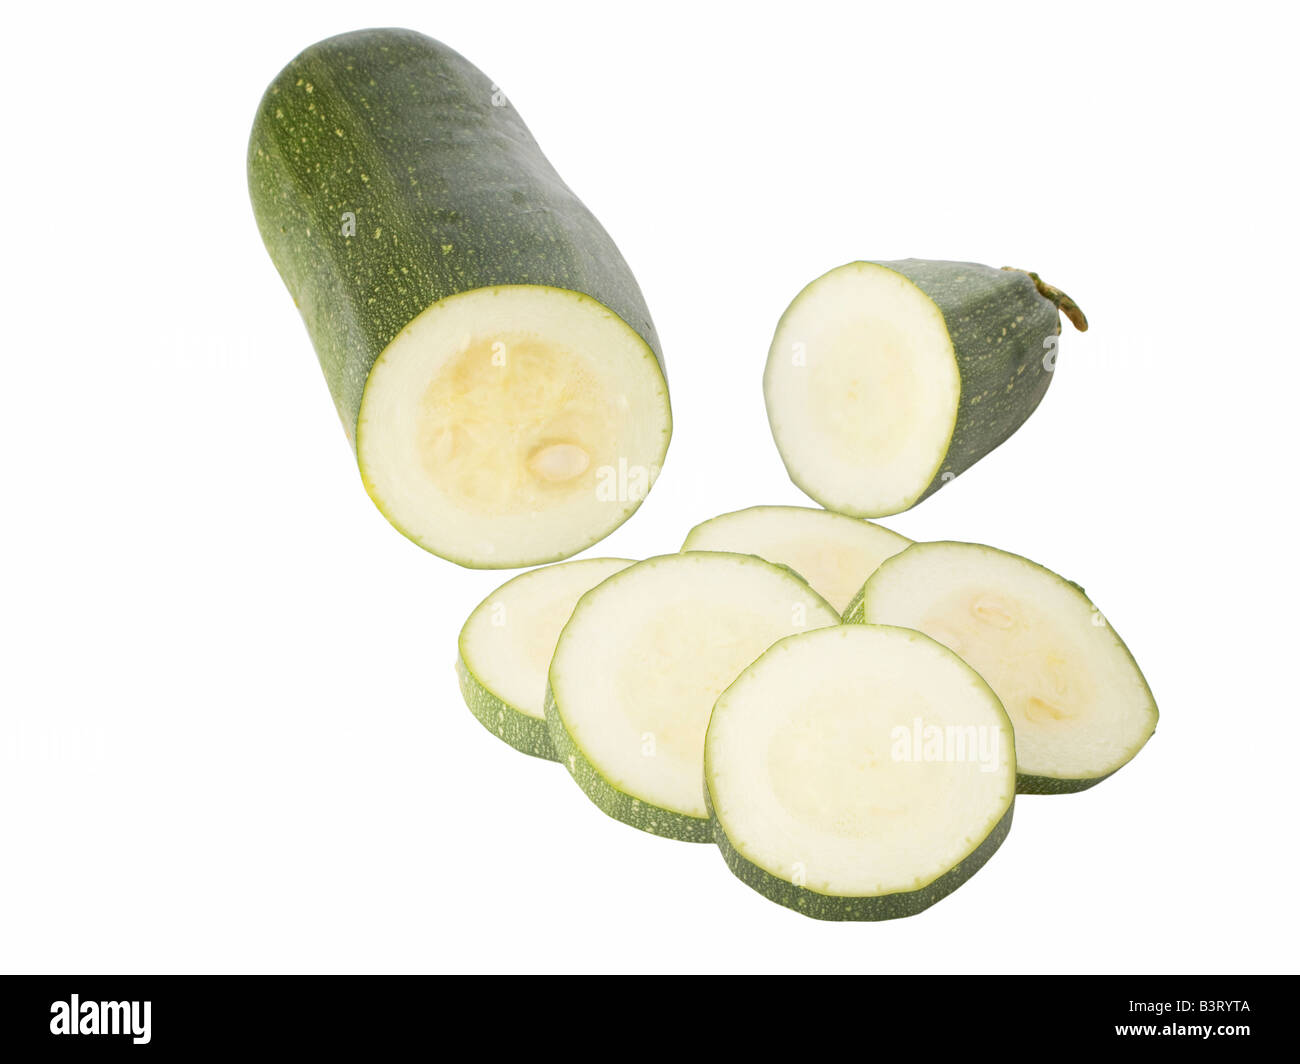 Sliced zucchini or courgette isolated on a white background Stock Photo